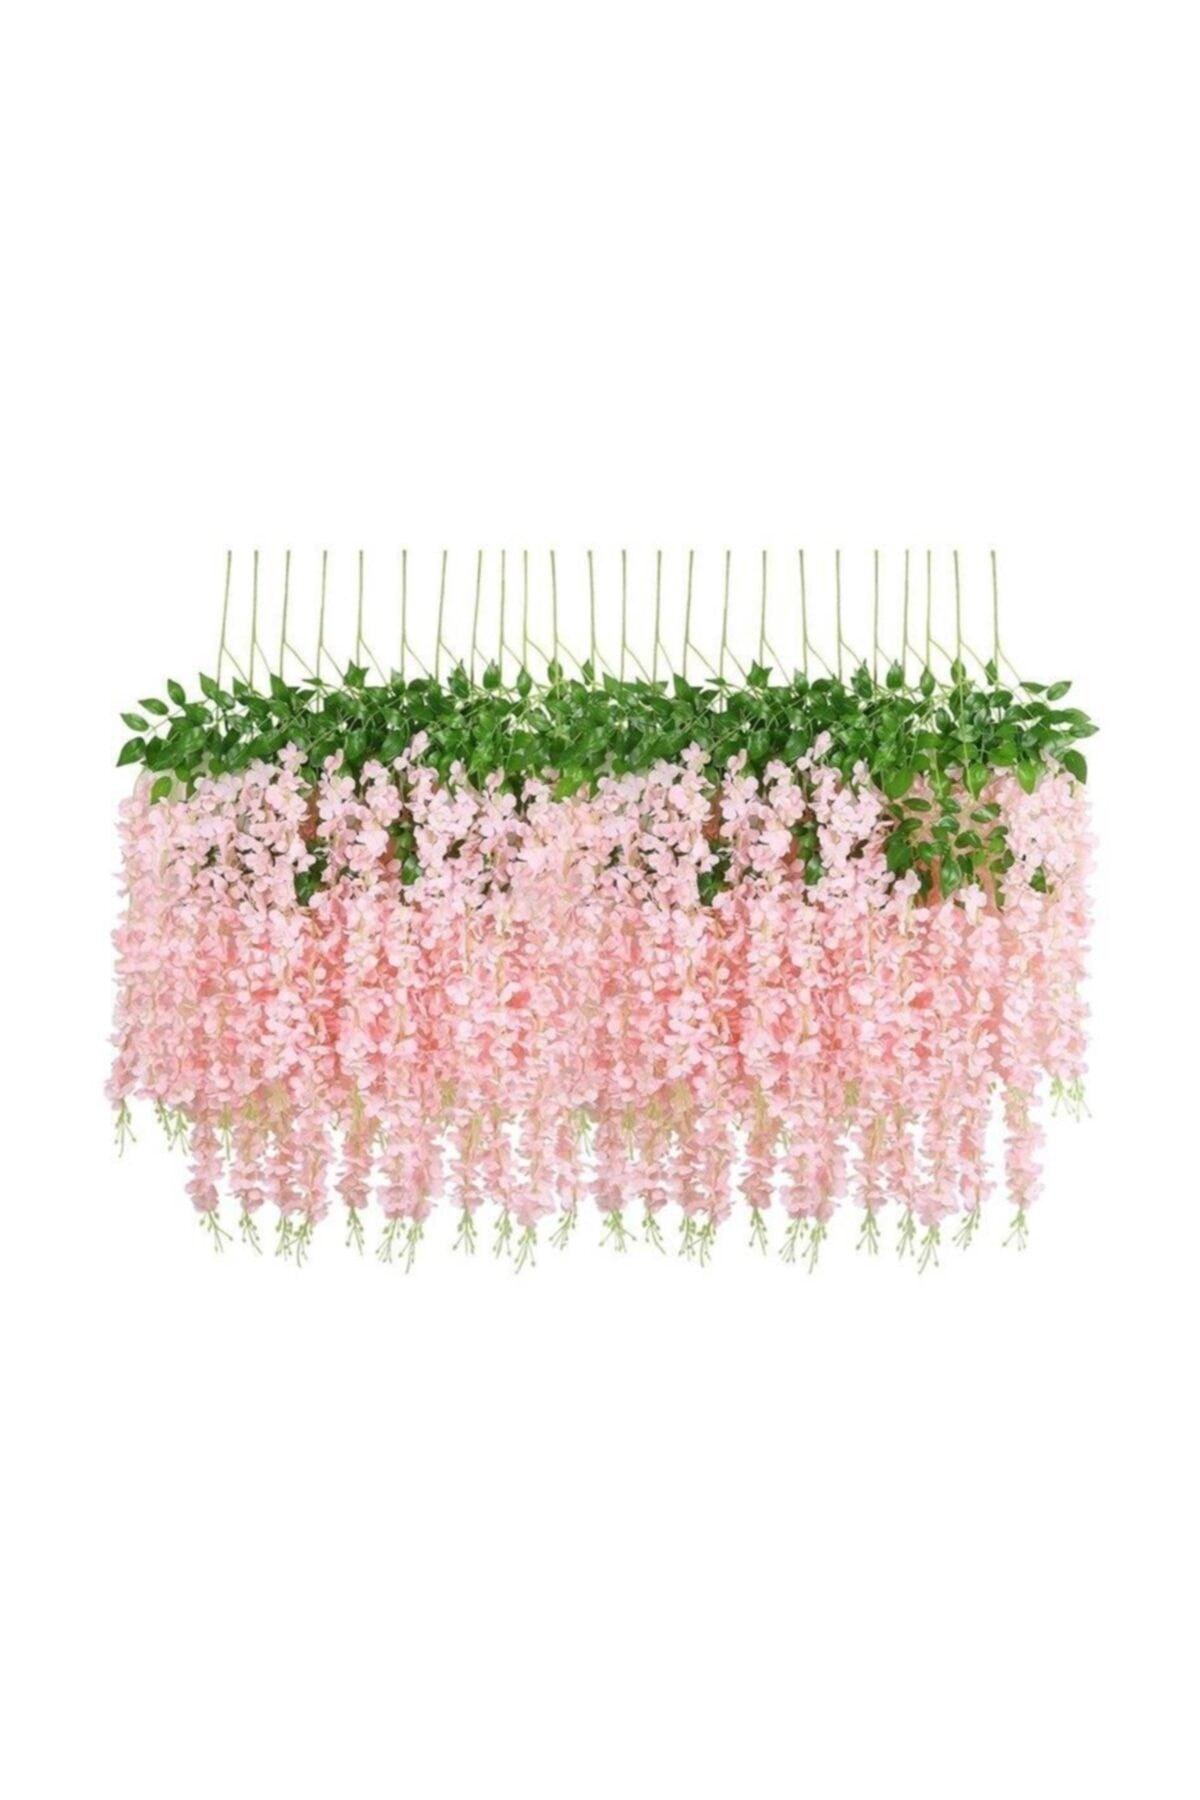 Dangling Artificial Flower Acacia Pink Light 80 cm 12 Pieces Vineyard With 3 Dangling Branches - Swordslife